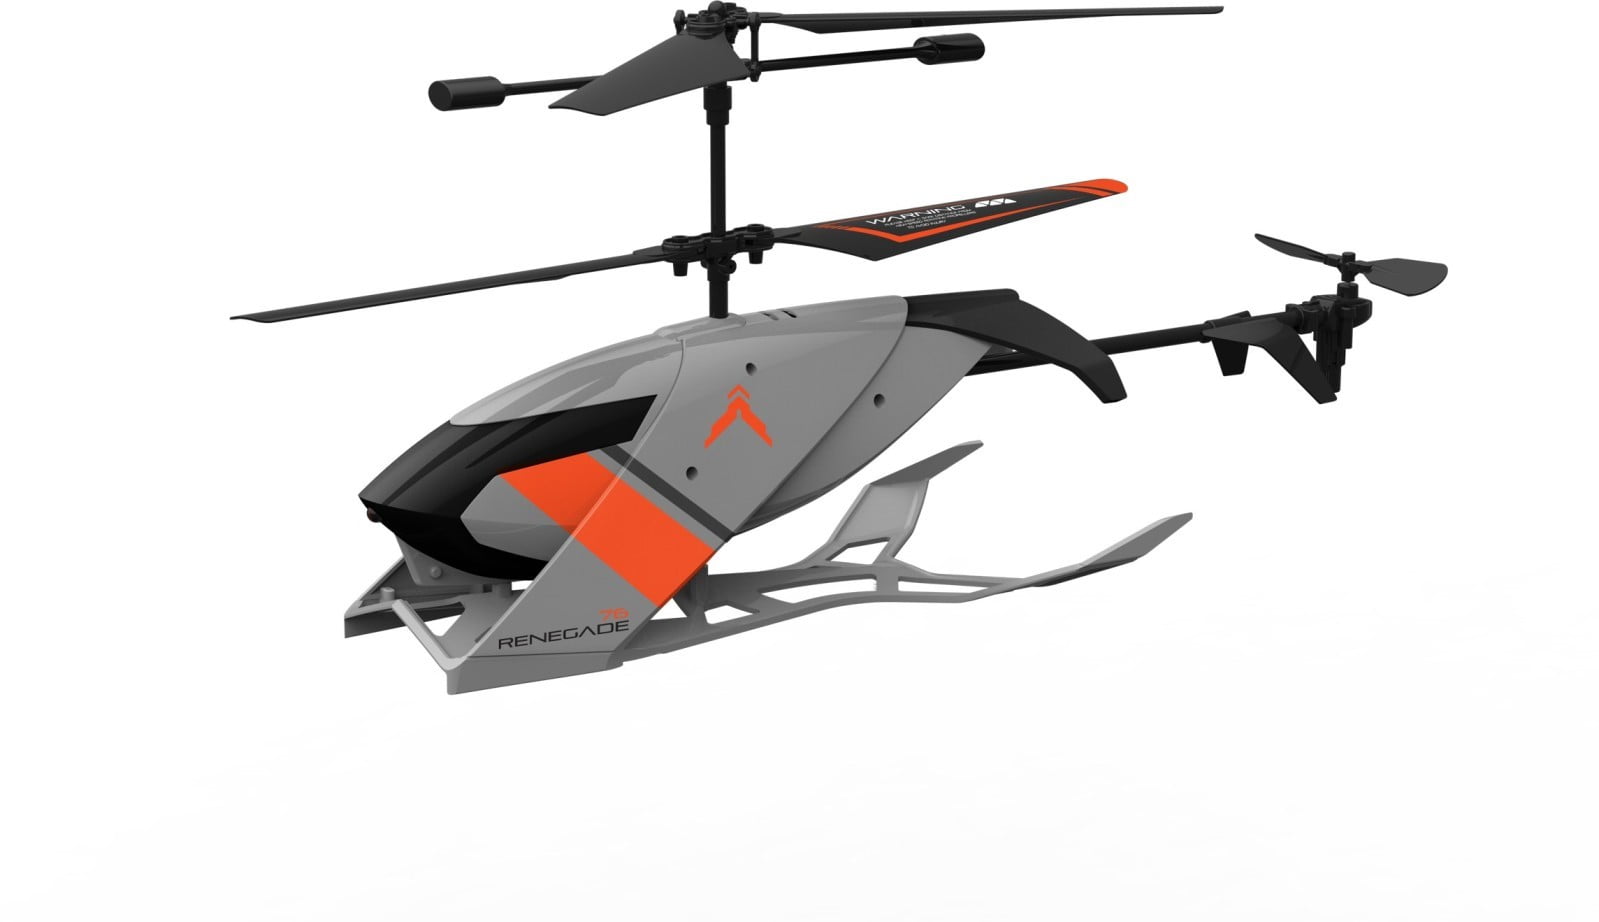 SkyRover Renegade Helicopter Remote Control Vehicles